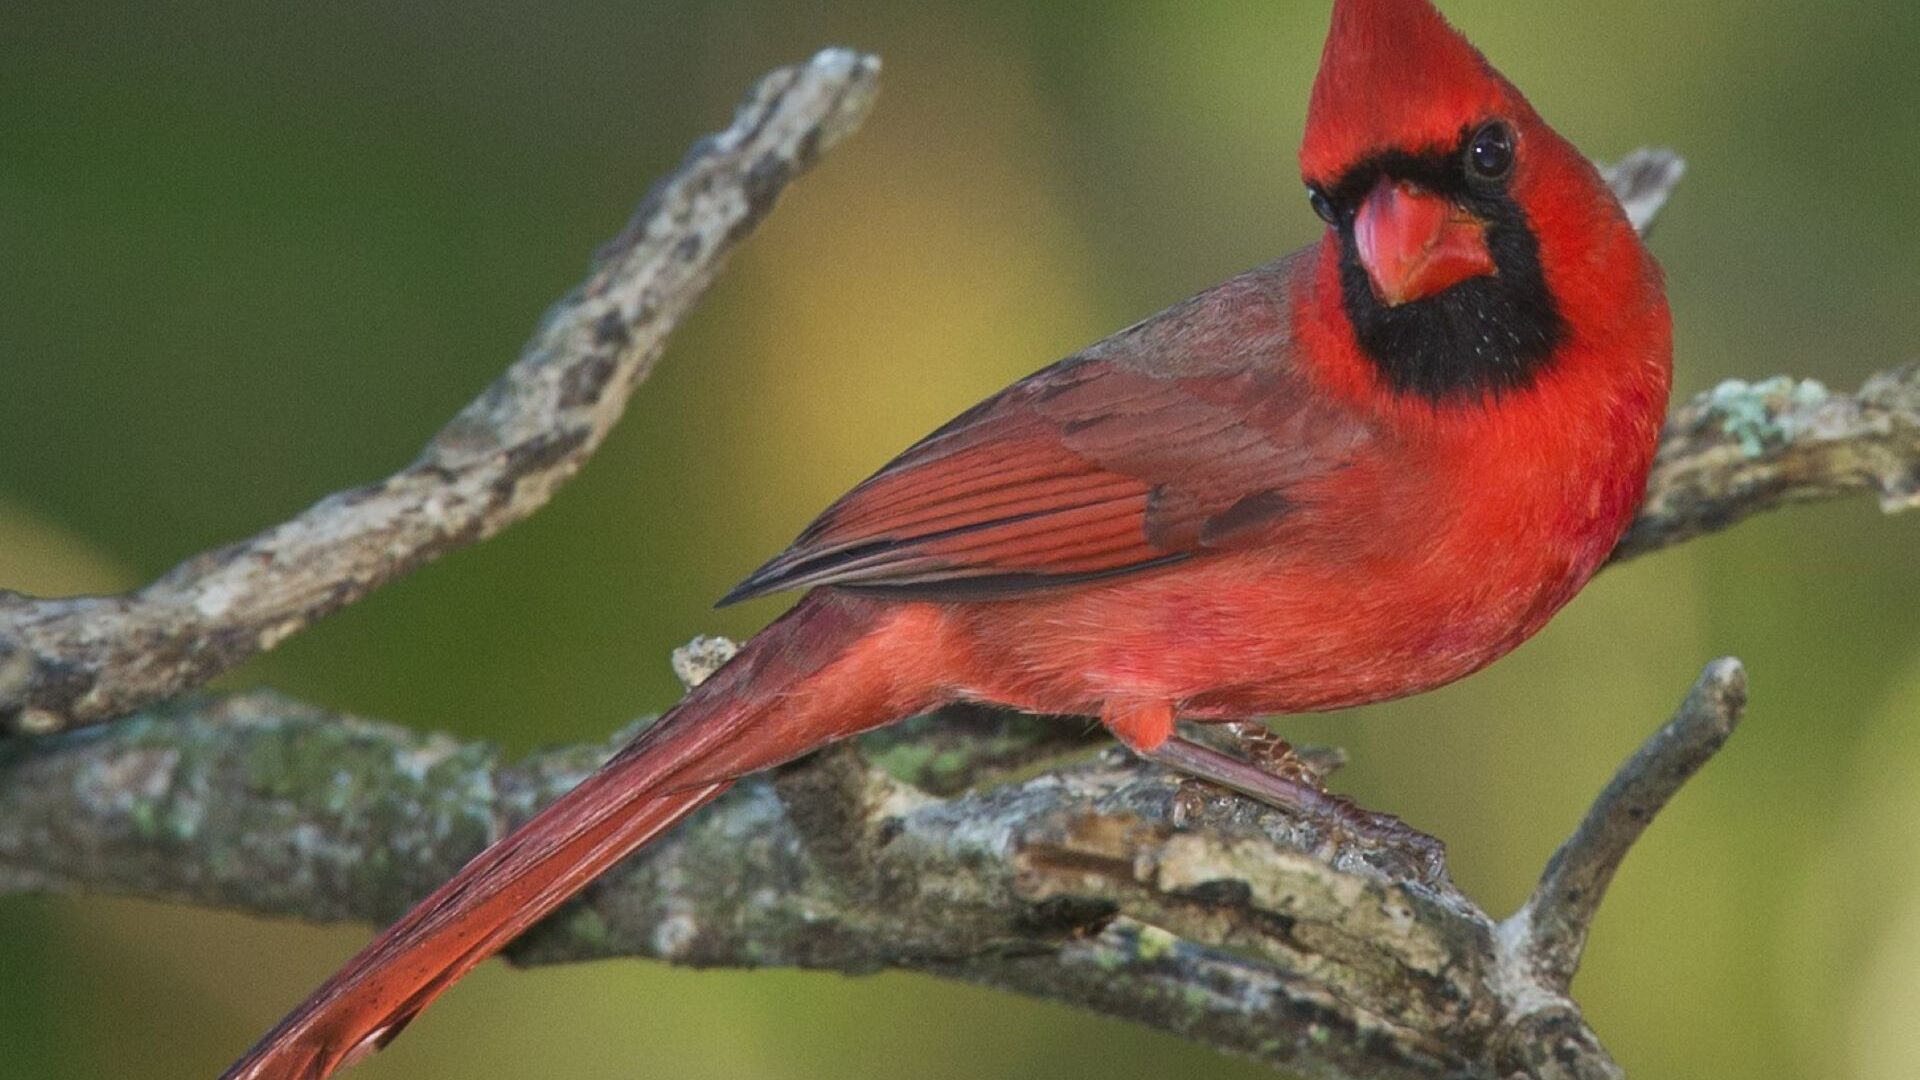 A red Northern Cardinal perched on a branch.